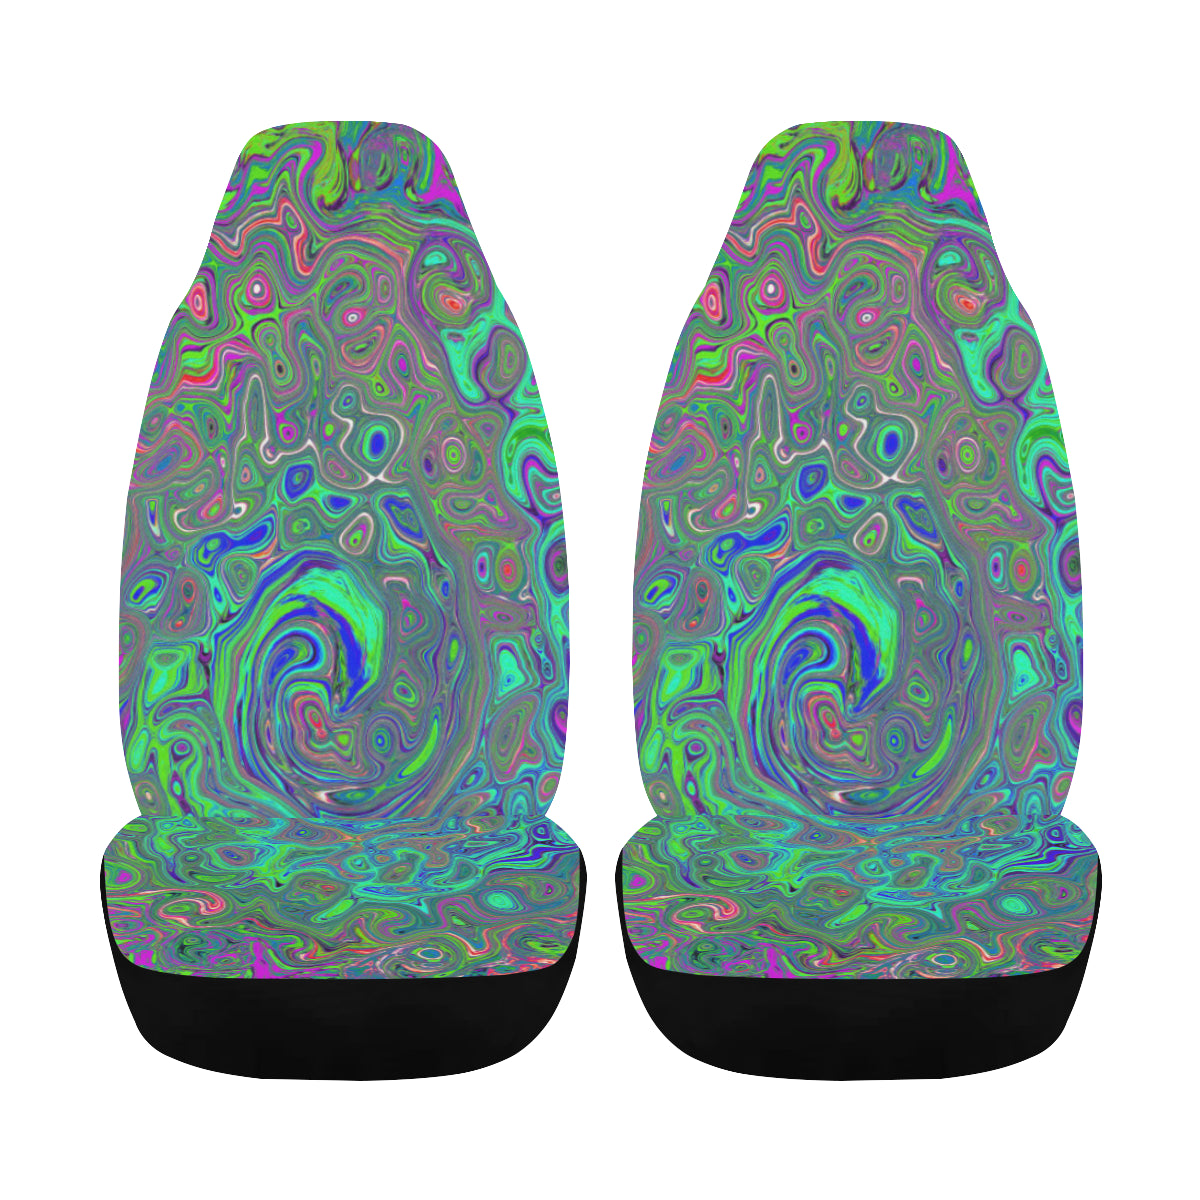 Car Seat Covers, Trippy Chartreuse and Blue Retro Liquid Swirl